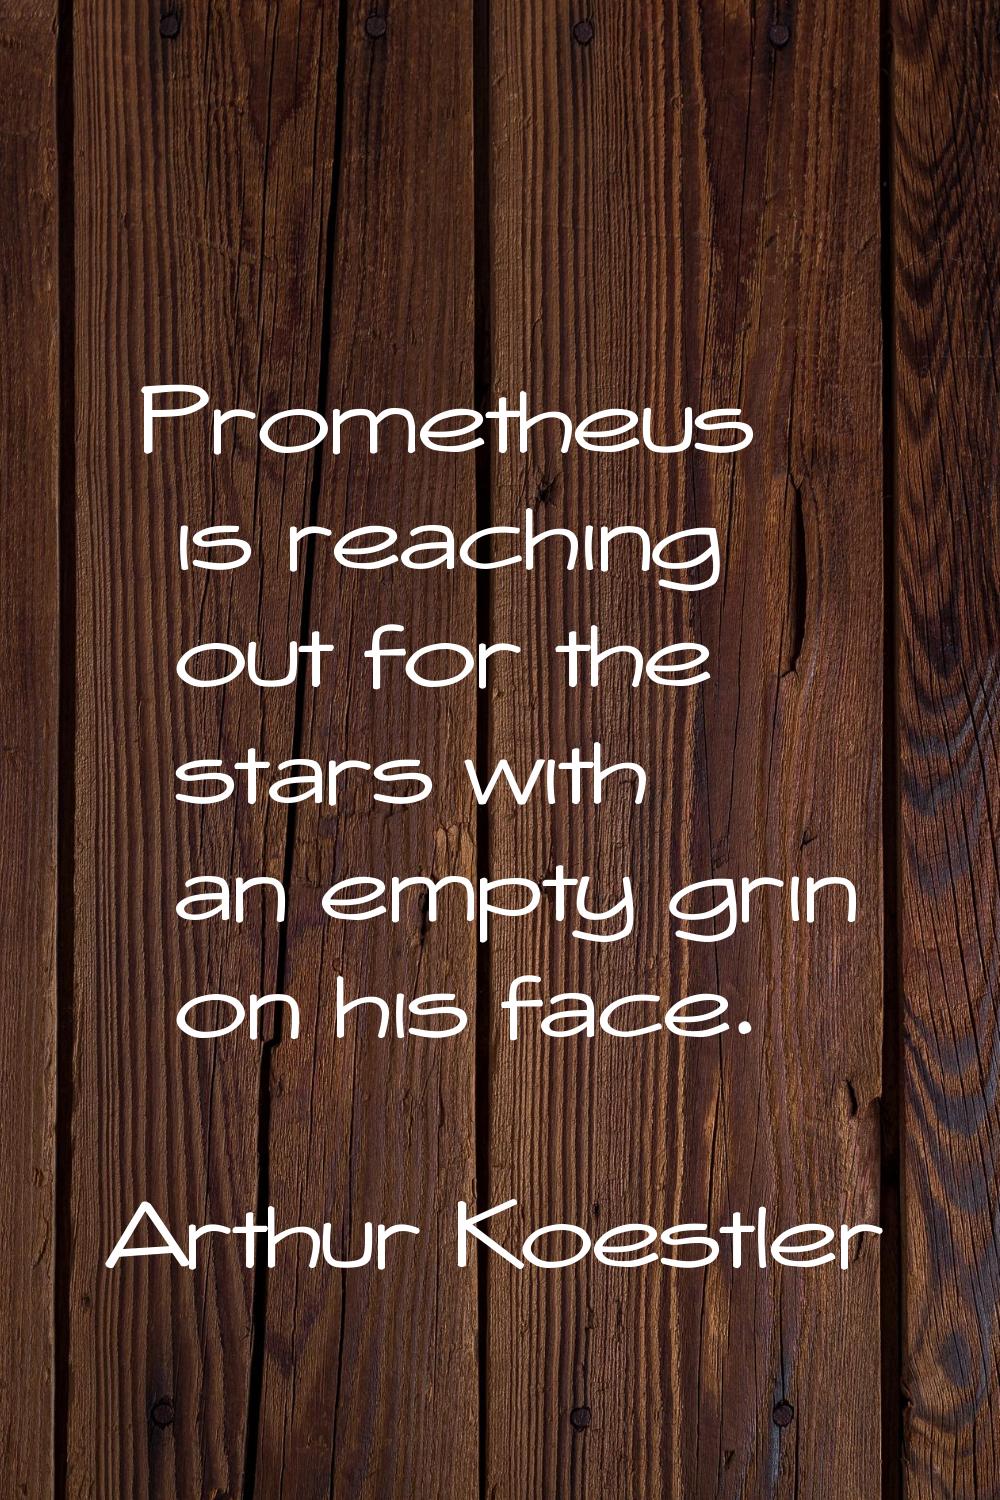 Prometheus is reaching out for the stars with an empty grin on his face.